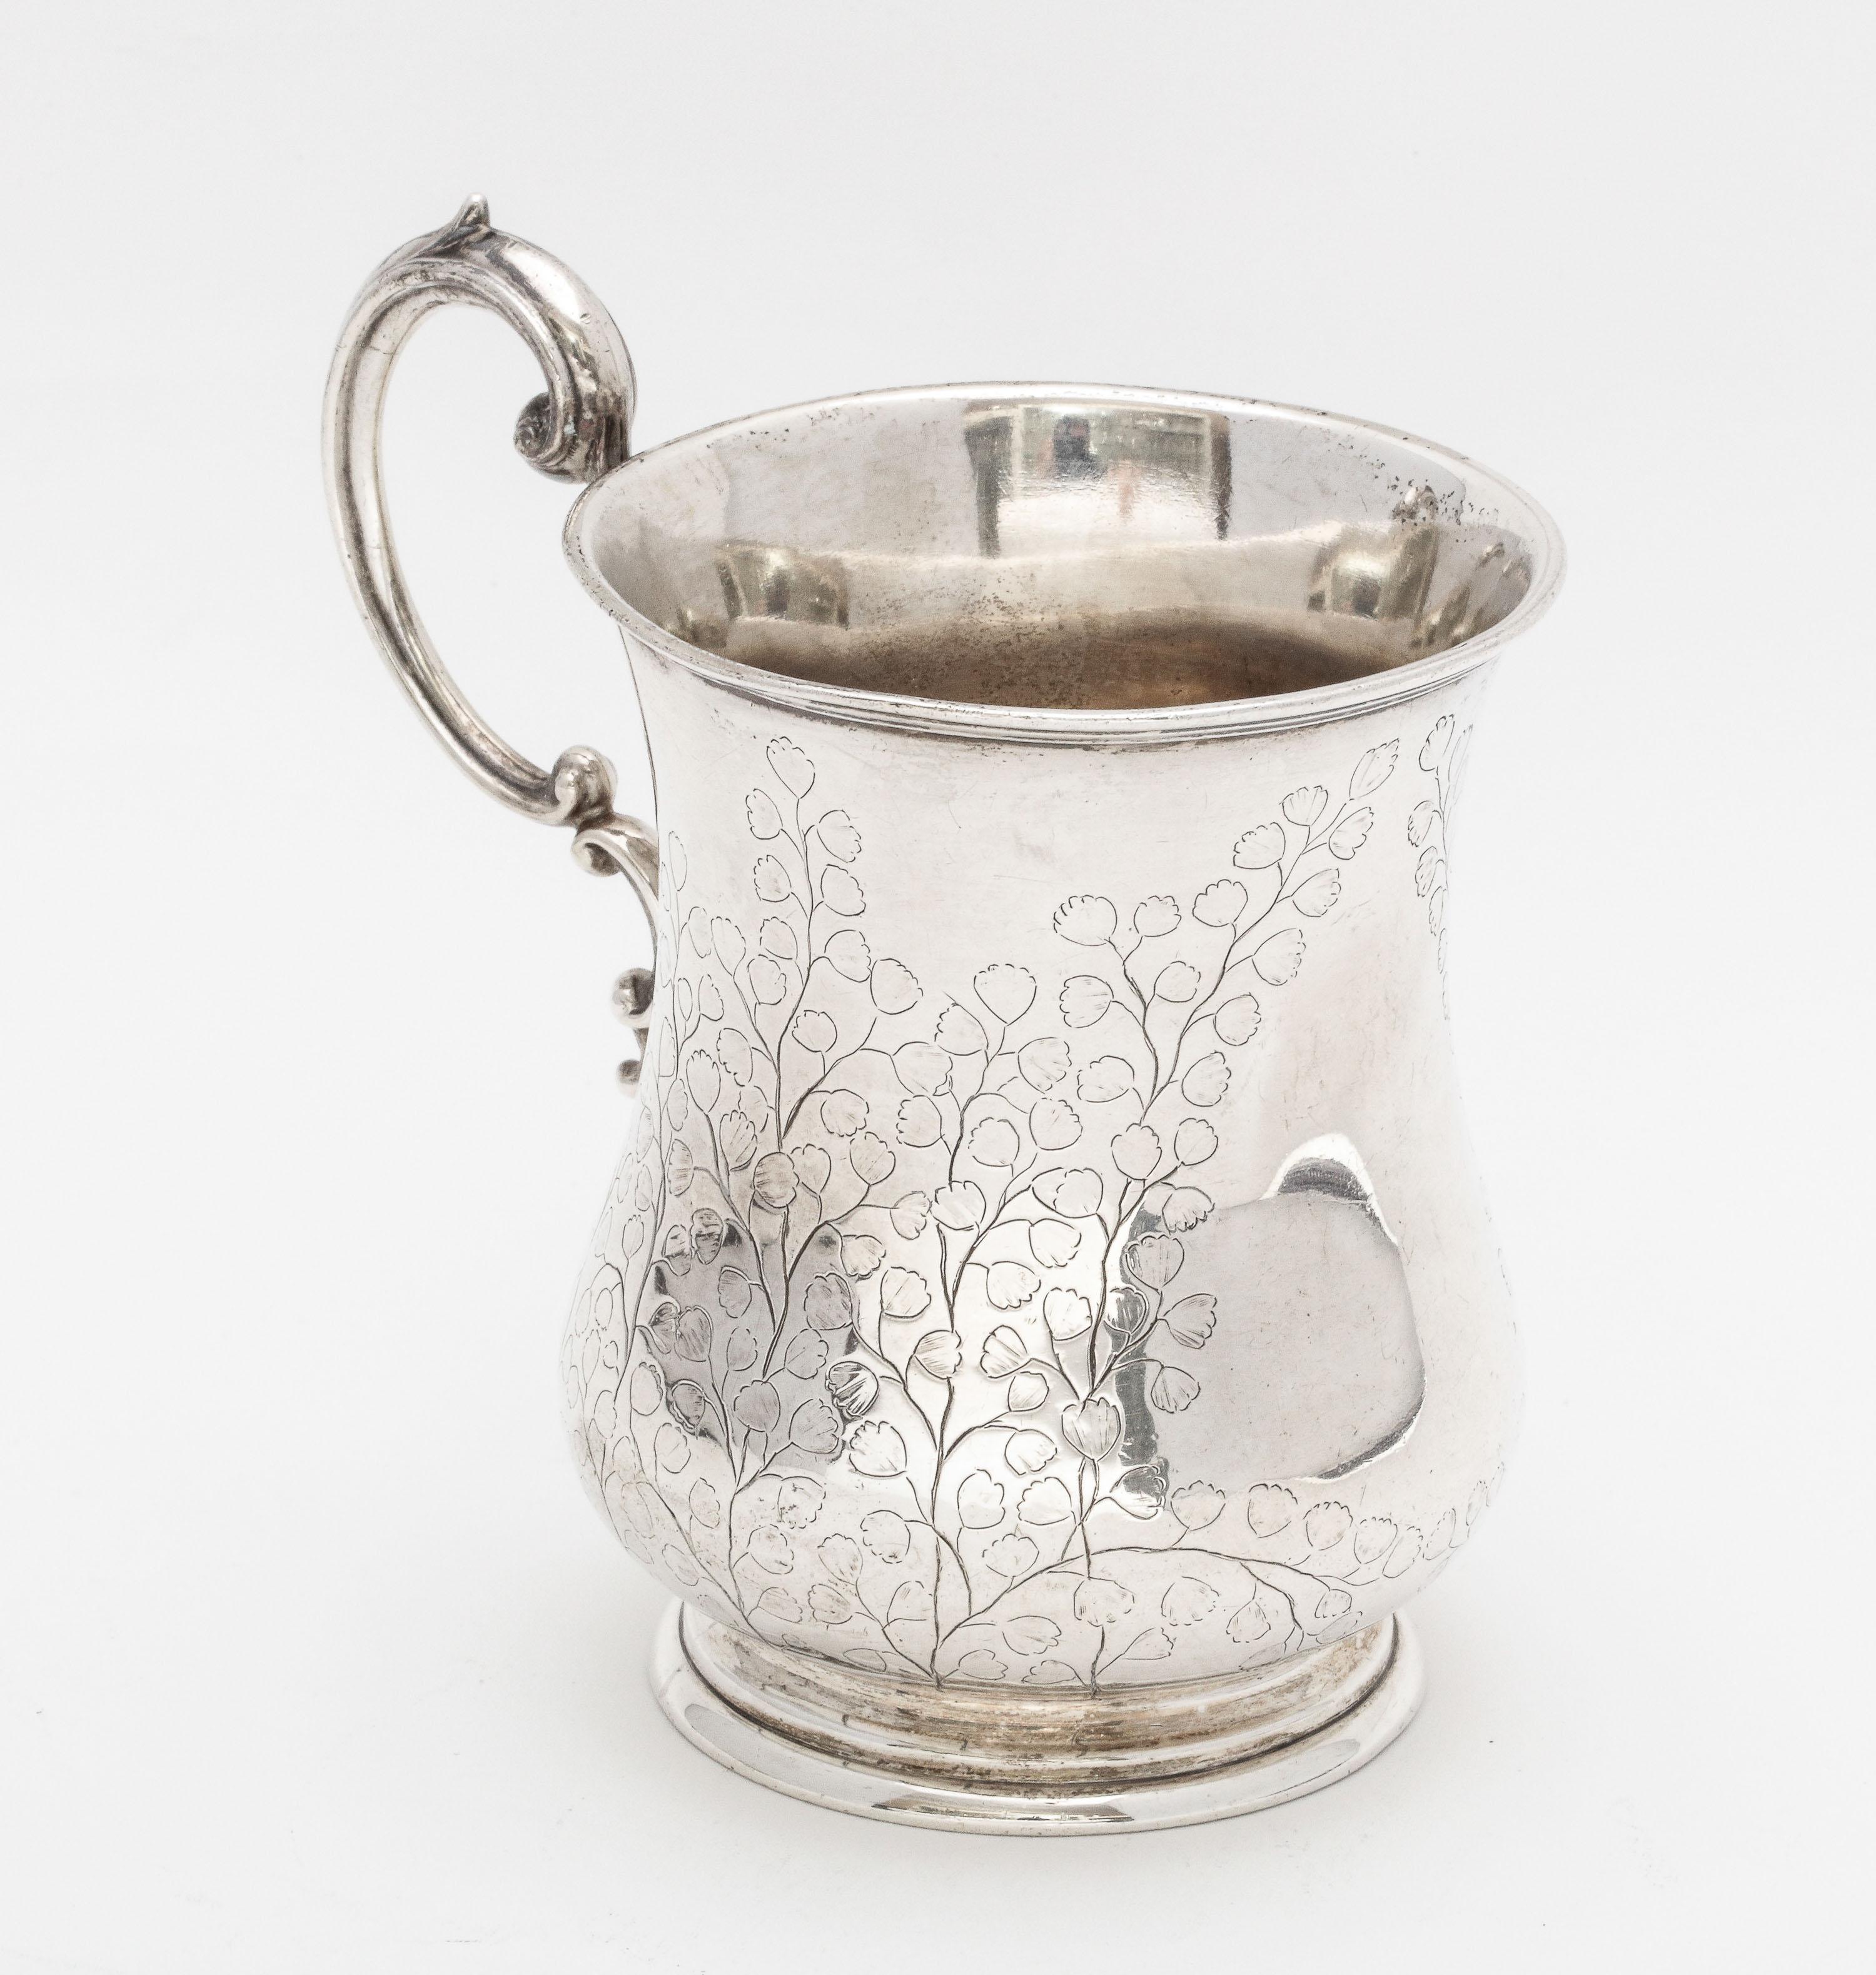 Victorian period, sterling silver, Anglo-Indian mug/cup, Calcutta, circa 1870s, Cooke and Kelvy - makers. Lovely etched designs. Measures 4 inches high (to top of handle) x 2 3/4 inches diameter x 4 1/4 inches from edge of handle far edge of cup